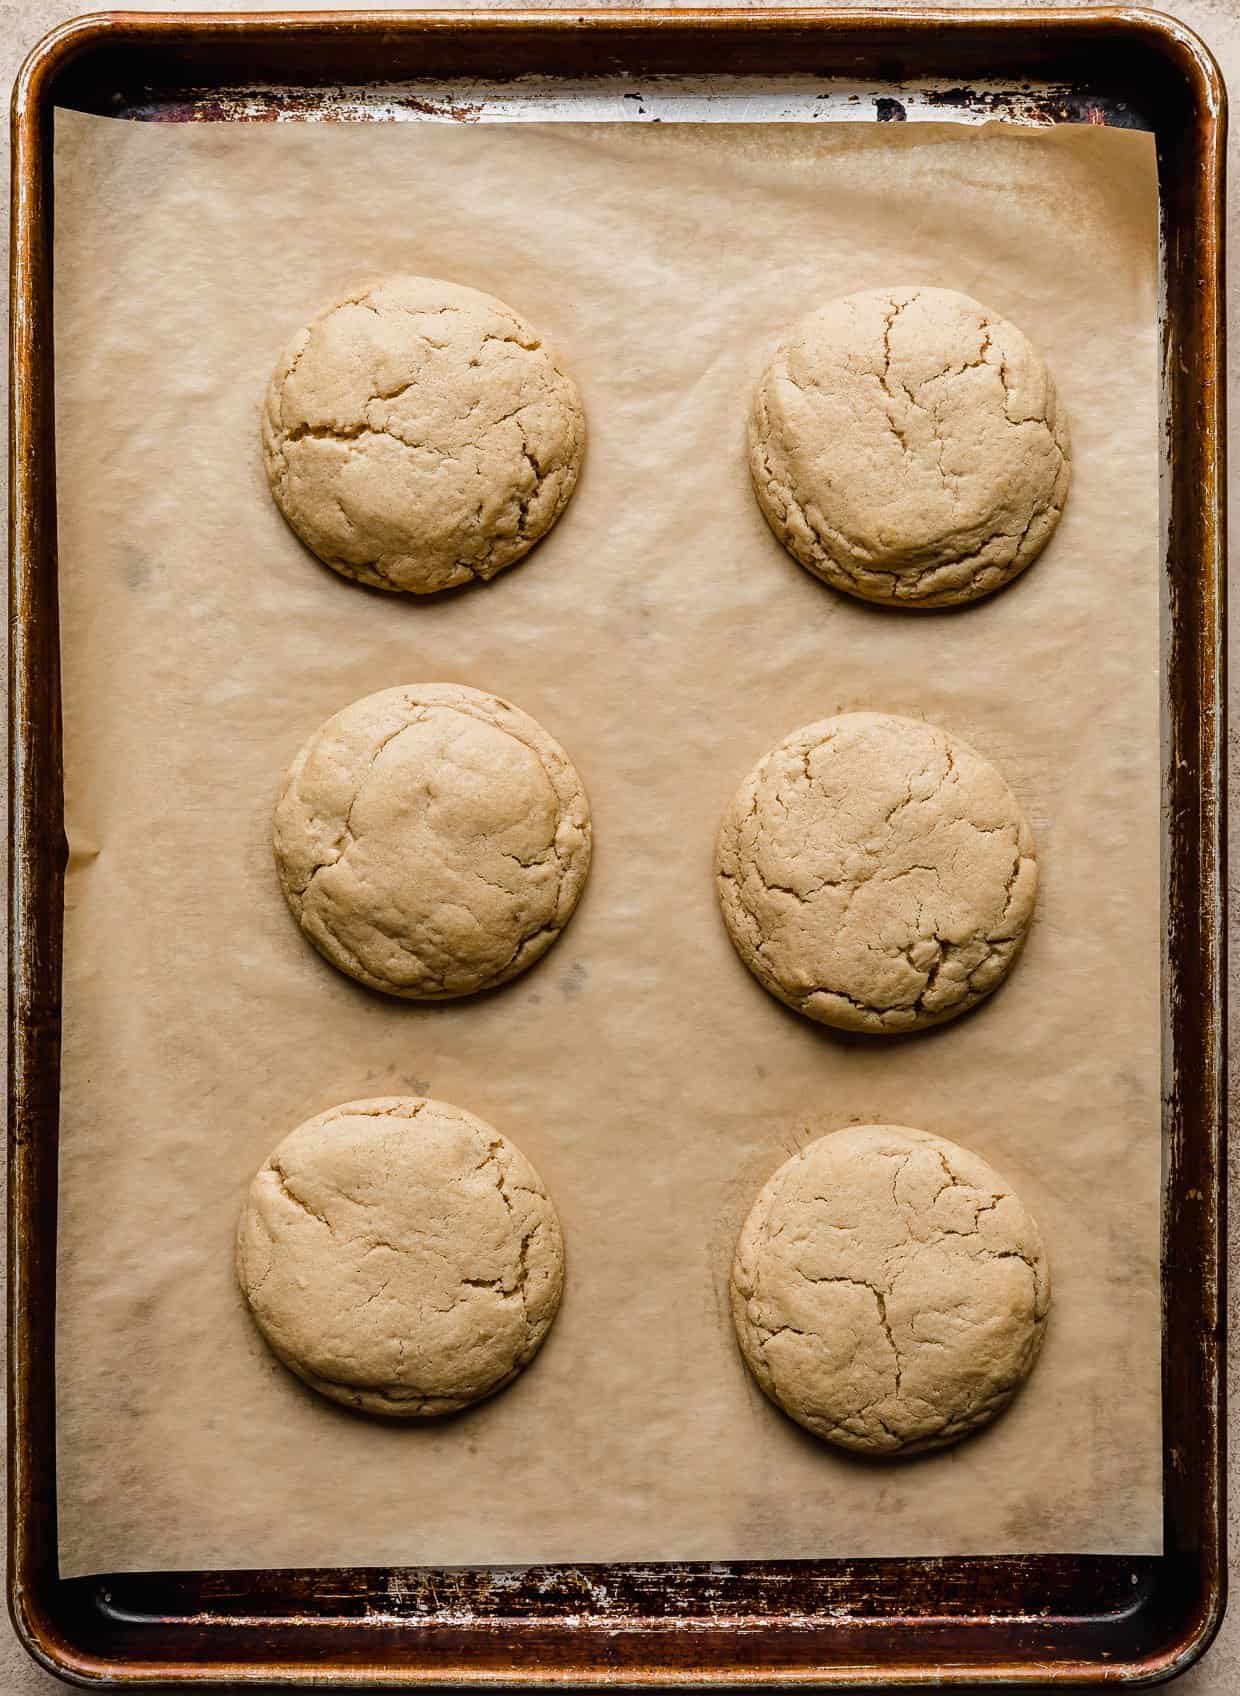 Six peanut butter cookies on a tan parchment paper lined baking sheet.